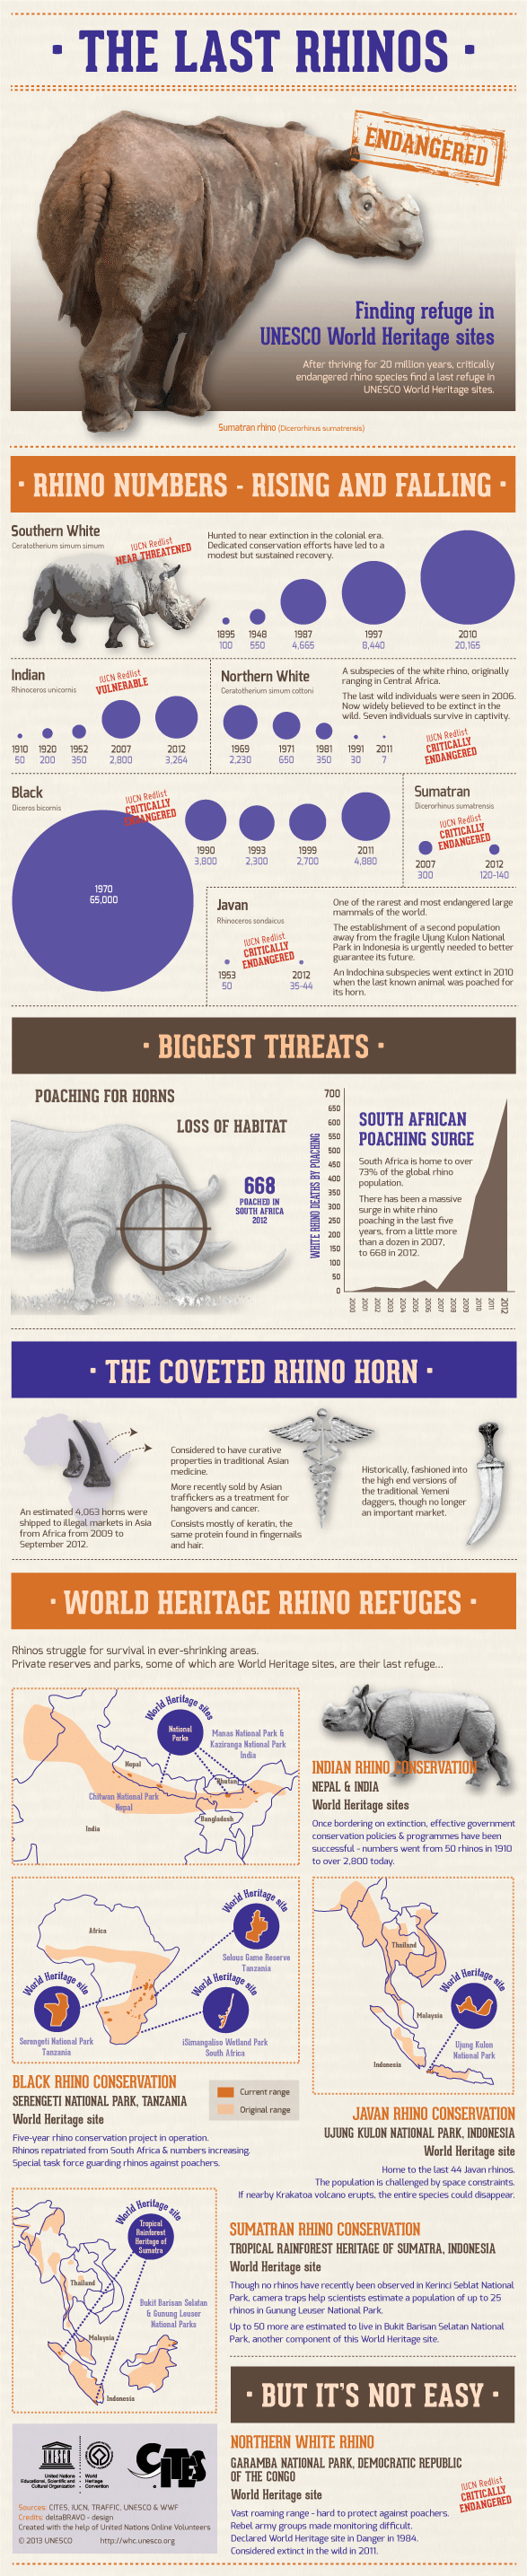 The Last Rhinos Find Refuge in World Heritage Sites Infographic